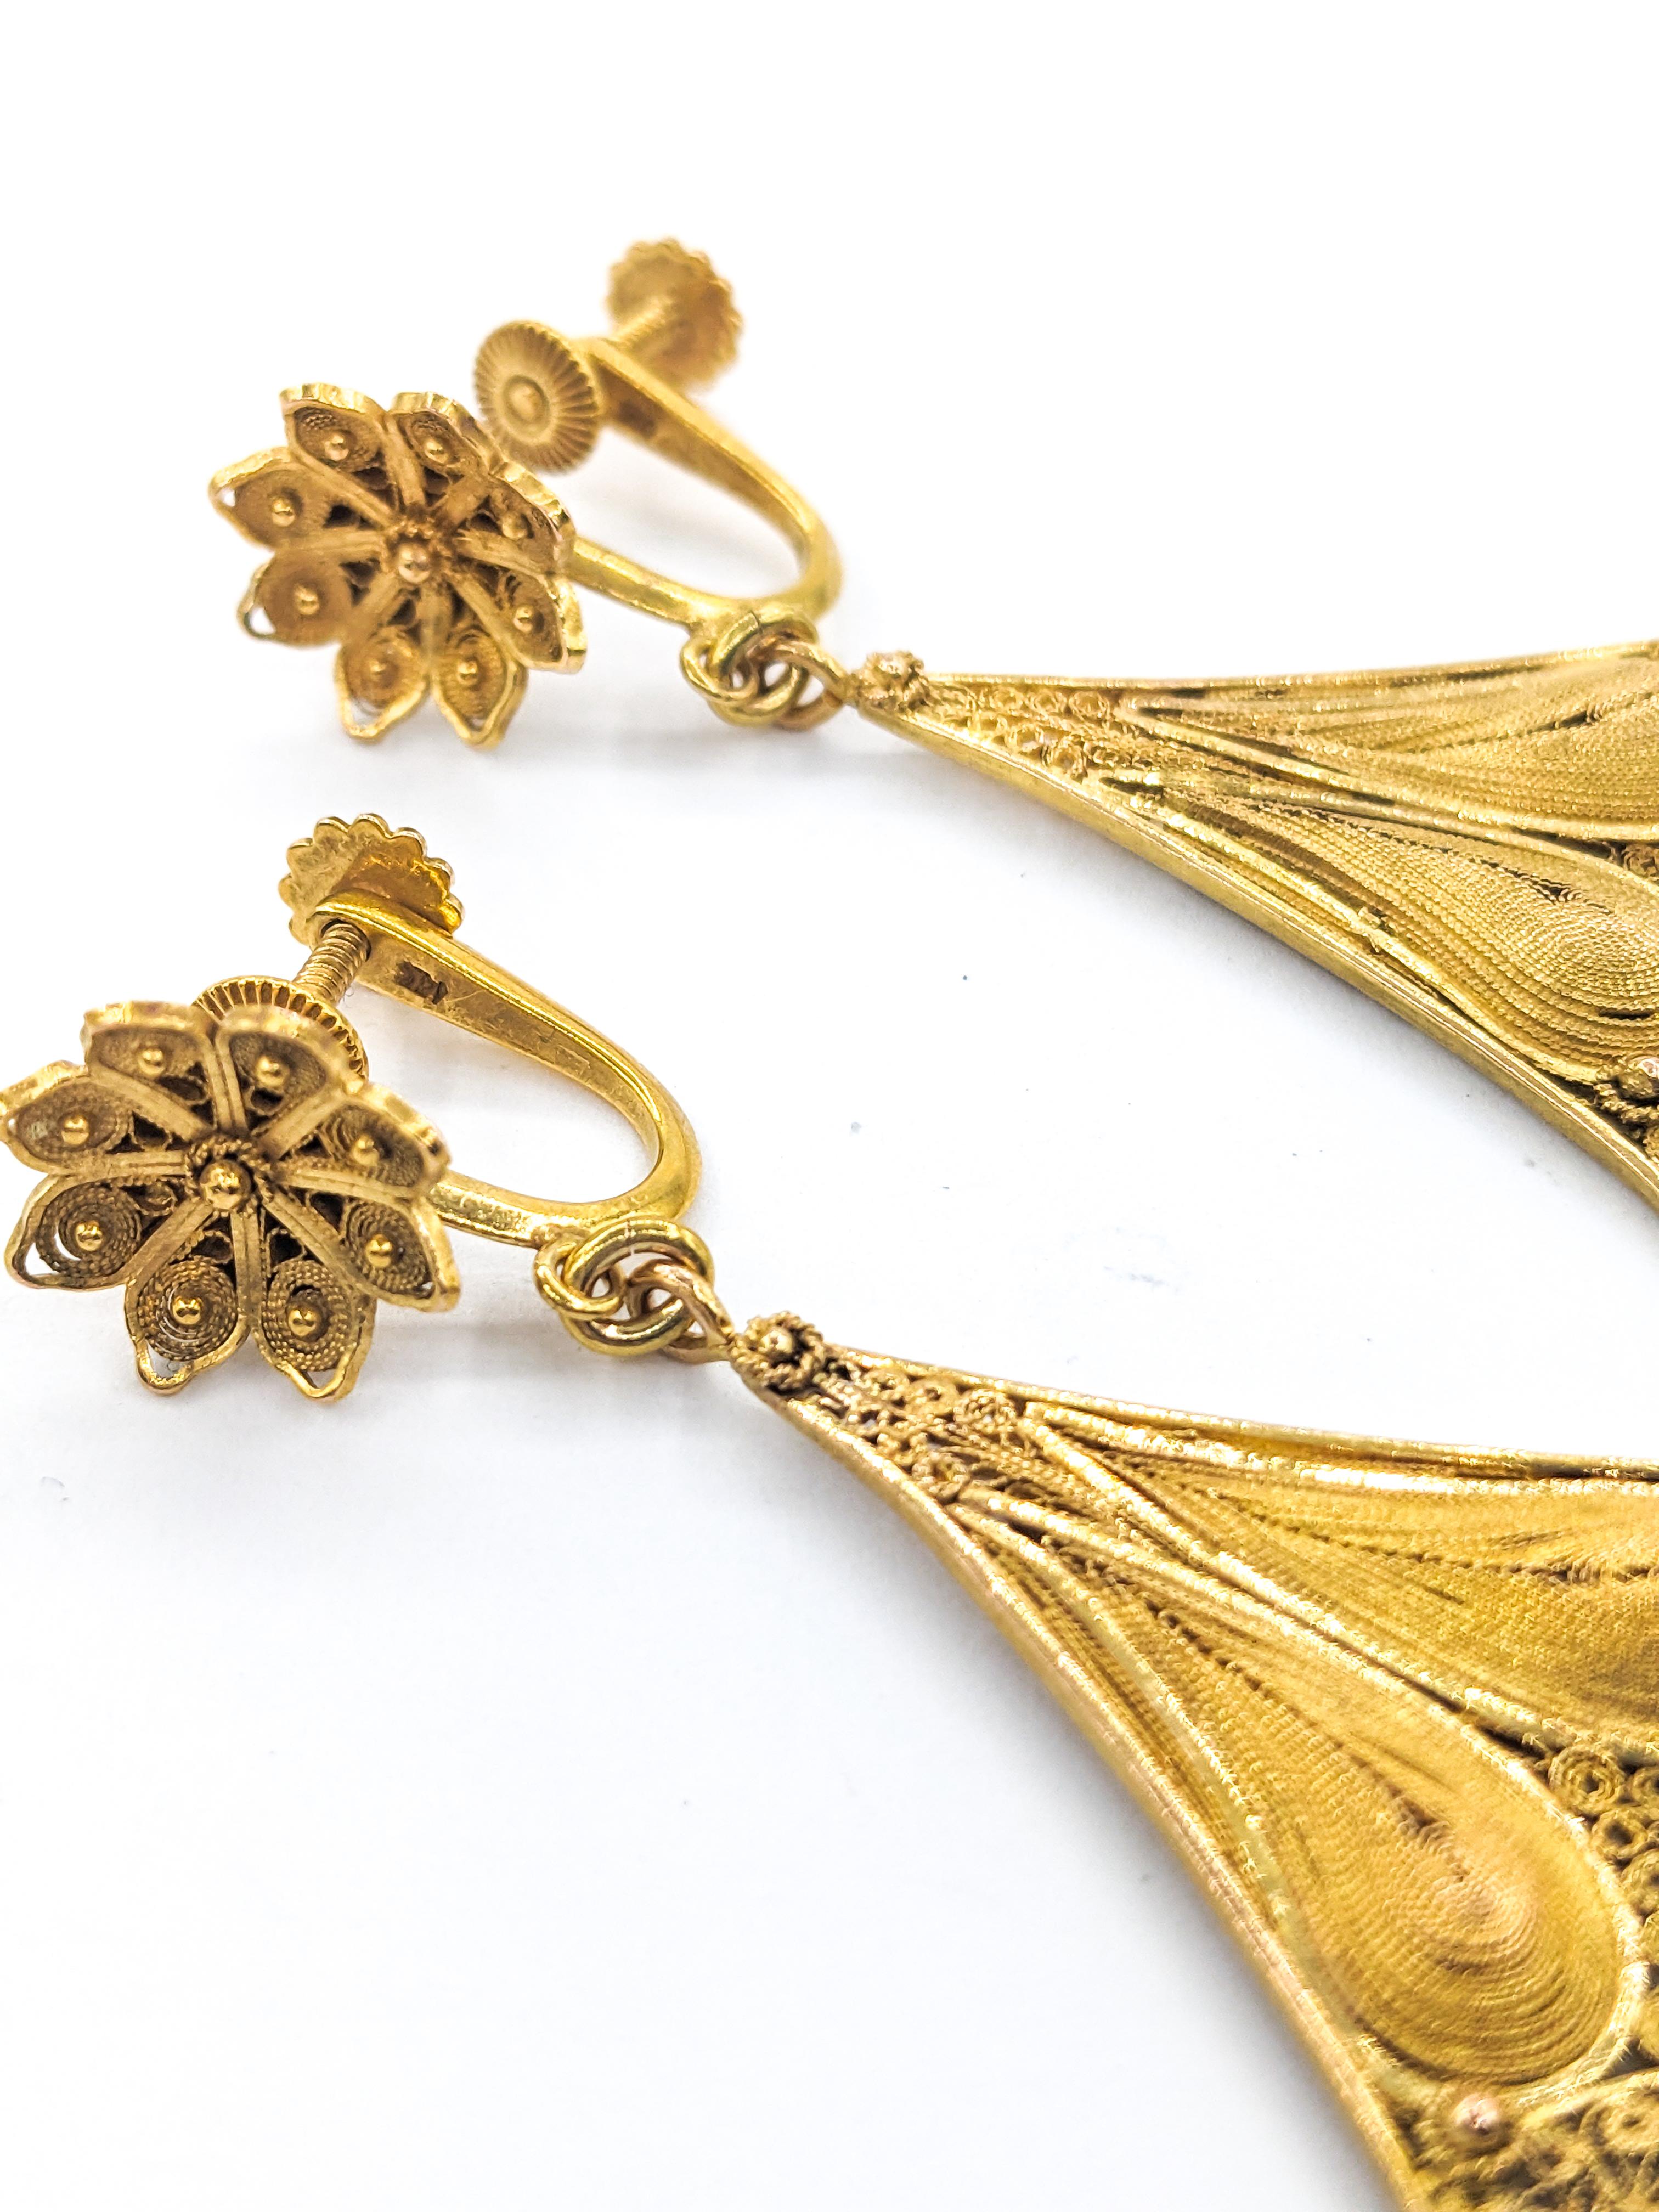 Art Nouveau filigree &Milgrain Drop Earrings In Yellow Gold

These exquisite Art Nouveau filigree and milgrain drop earrings, dating back to 1890-1910, are masterfully crafted in 18kt yellow gold. They feature a detailed and delicate design,